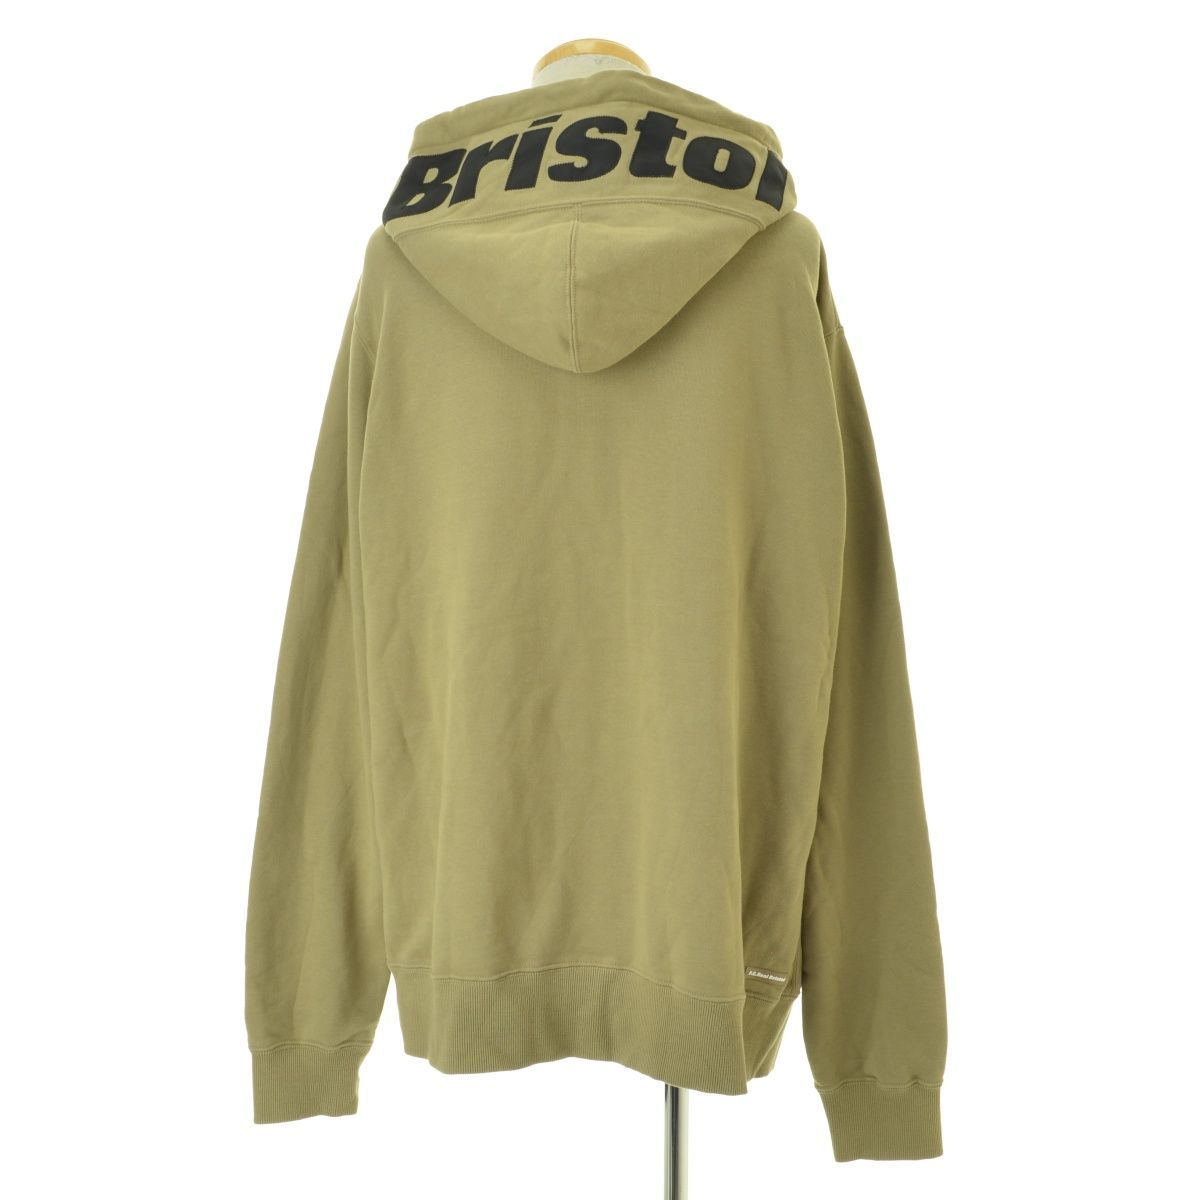 FCRB PULLOVER SWEAT HOODIEスウェットパーカー - パーカー